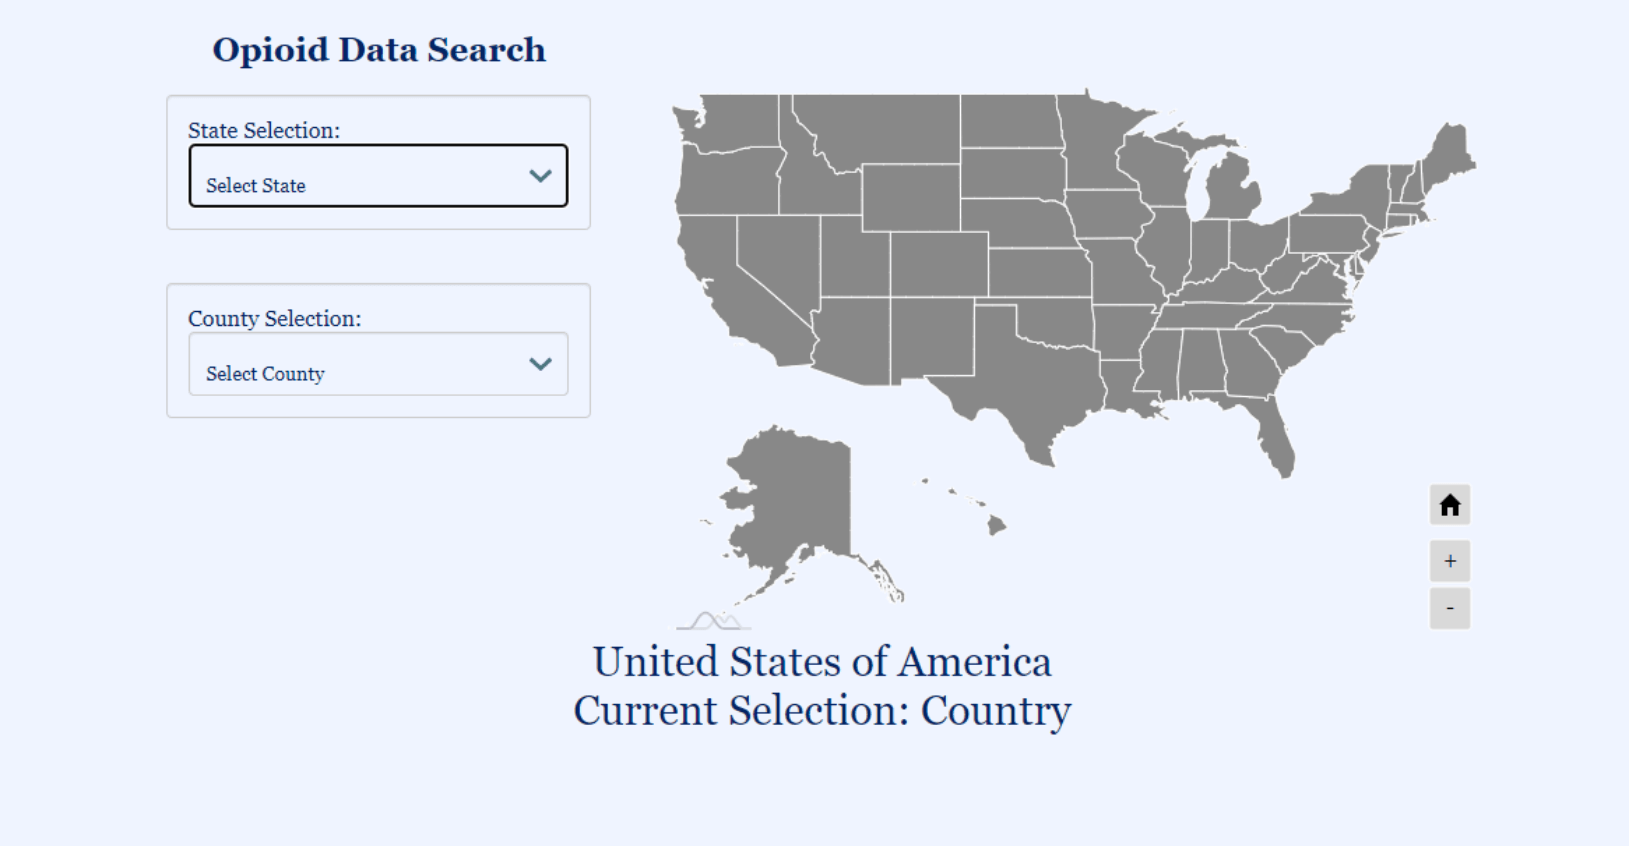 A screenshot showing the initial page layout of our interactive opioid data visualization. It shows a map of the United States, and some dropdown menus.